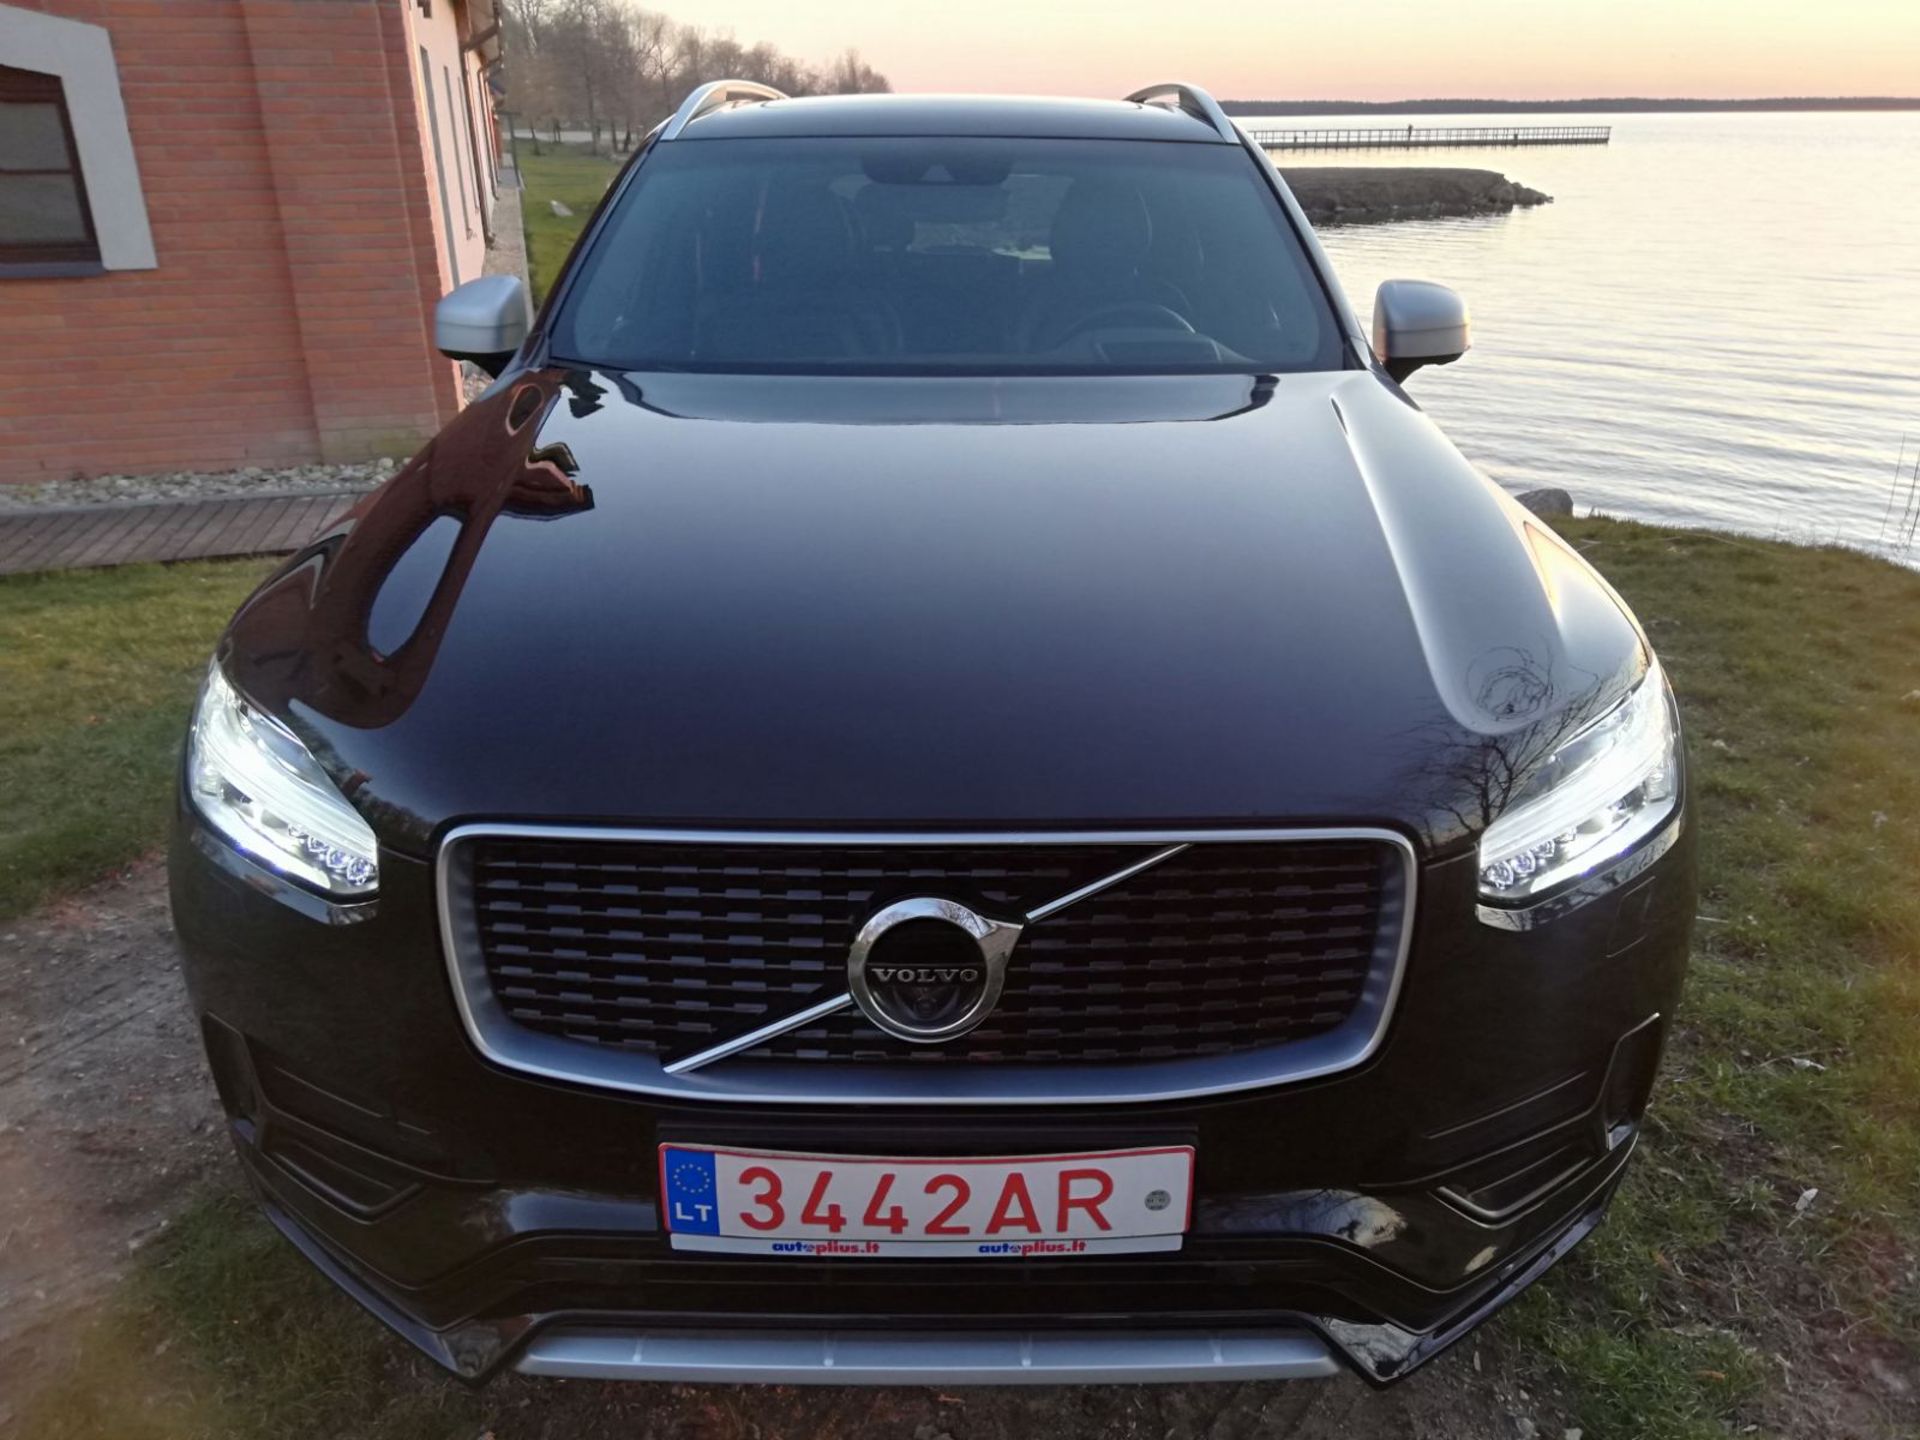 2017 VOLVO XC90 T6 AWD LEFT HAND DRIVE R-DESIGN 2.0L PETROL AUTOMATIC, 45,000 KM, DRIVES LIKE NEW - Image 7 of 20